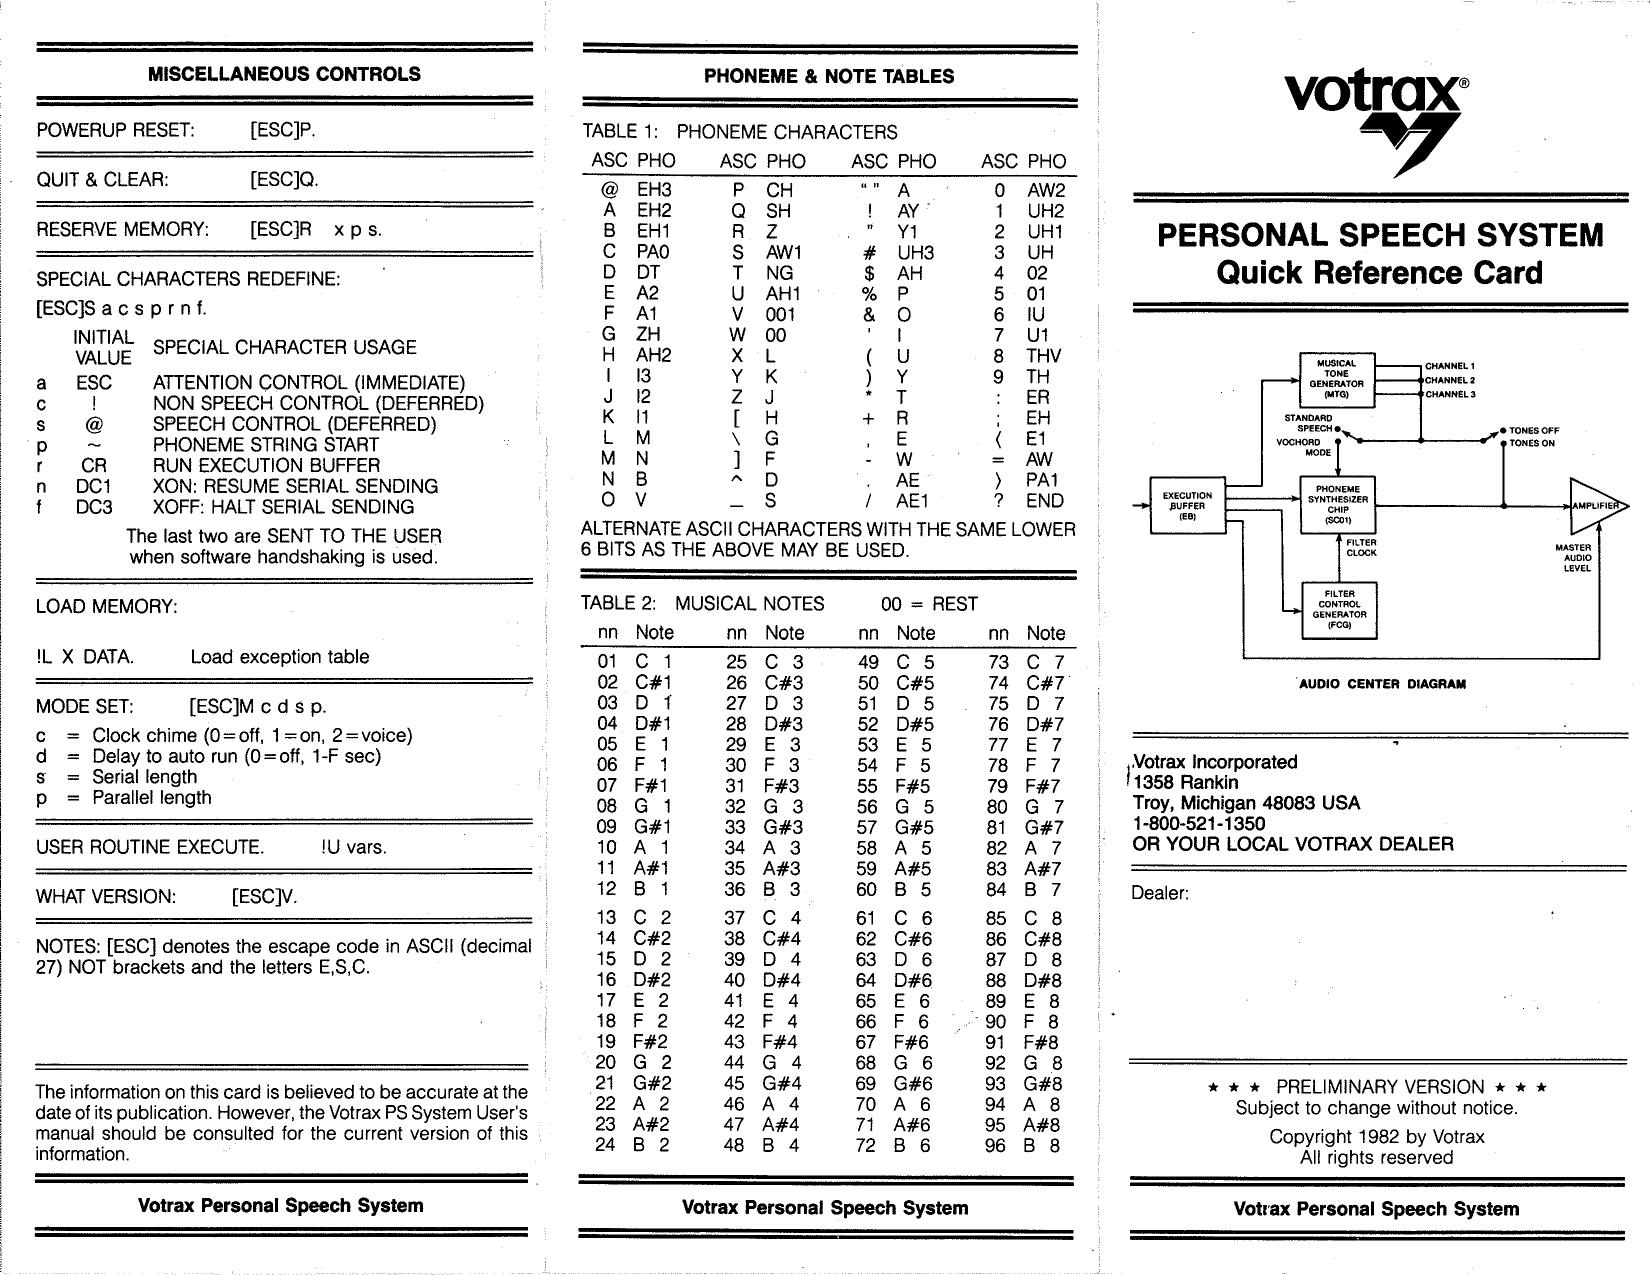 Votrax Personal Speech System (Quick Reference Card) (U)